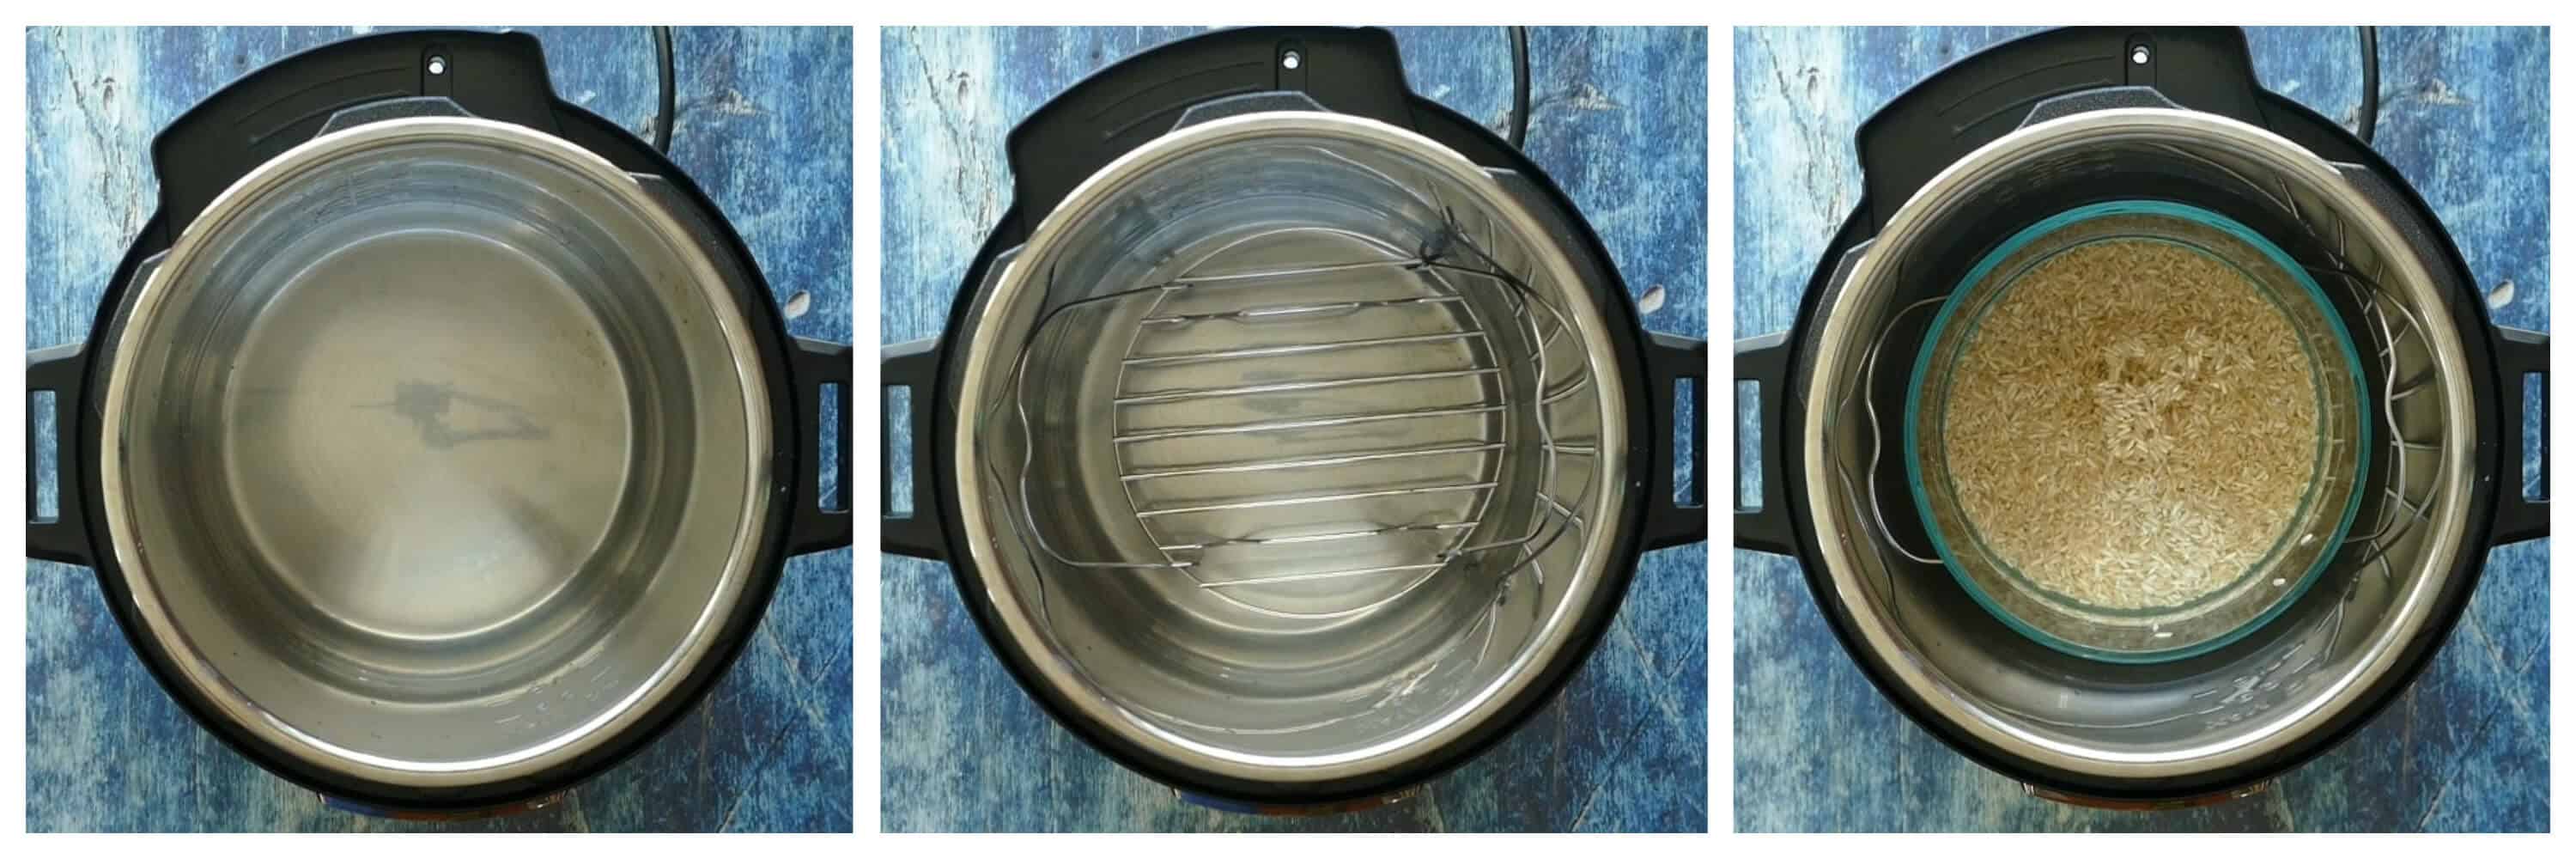 Instant Pot Brown Rice PIP Instructions 2 collage - Instant Pot with water, add trivet, add bowl with water and rice - Paint the Kitchen Red